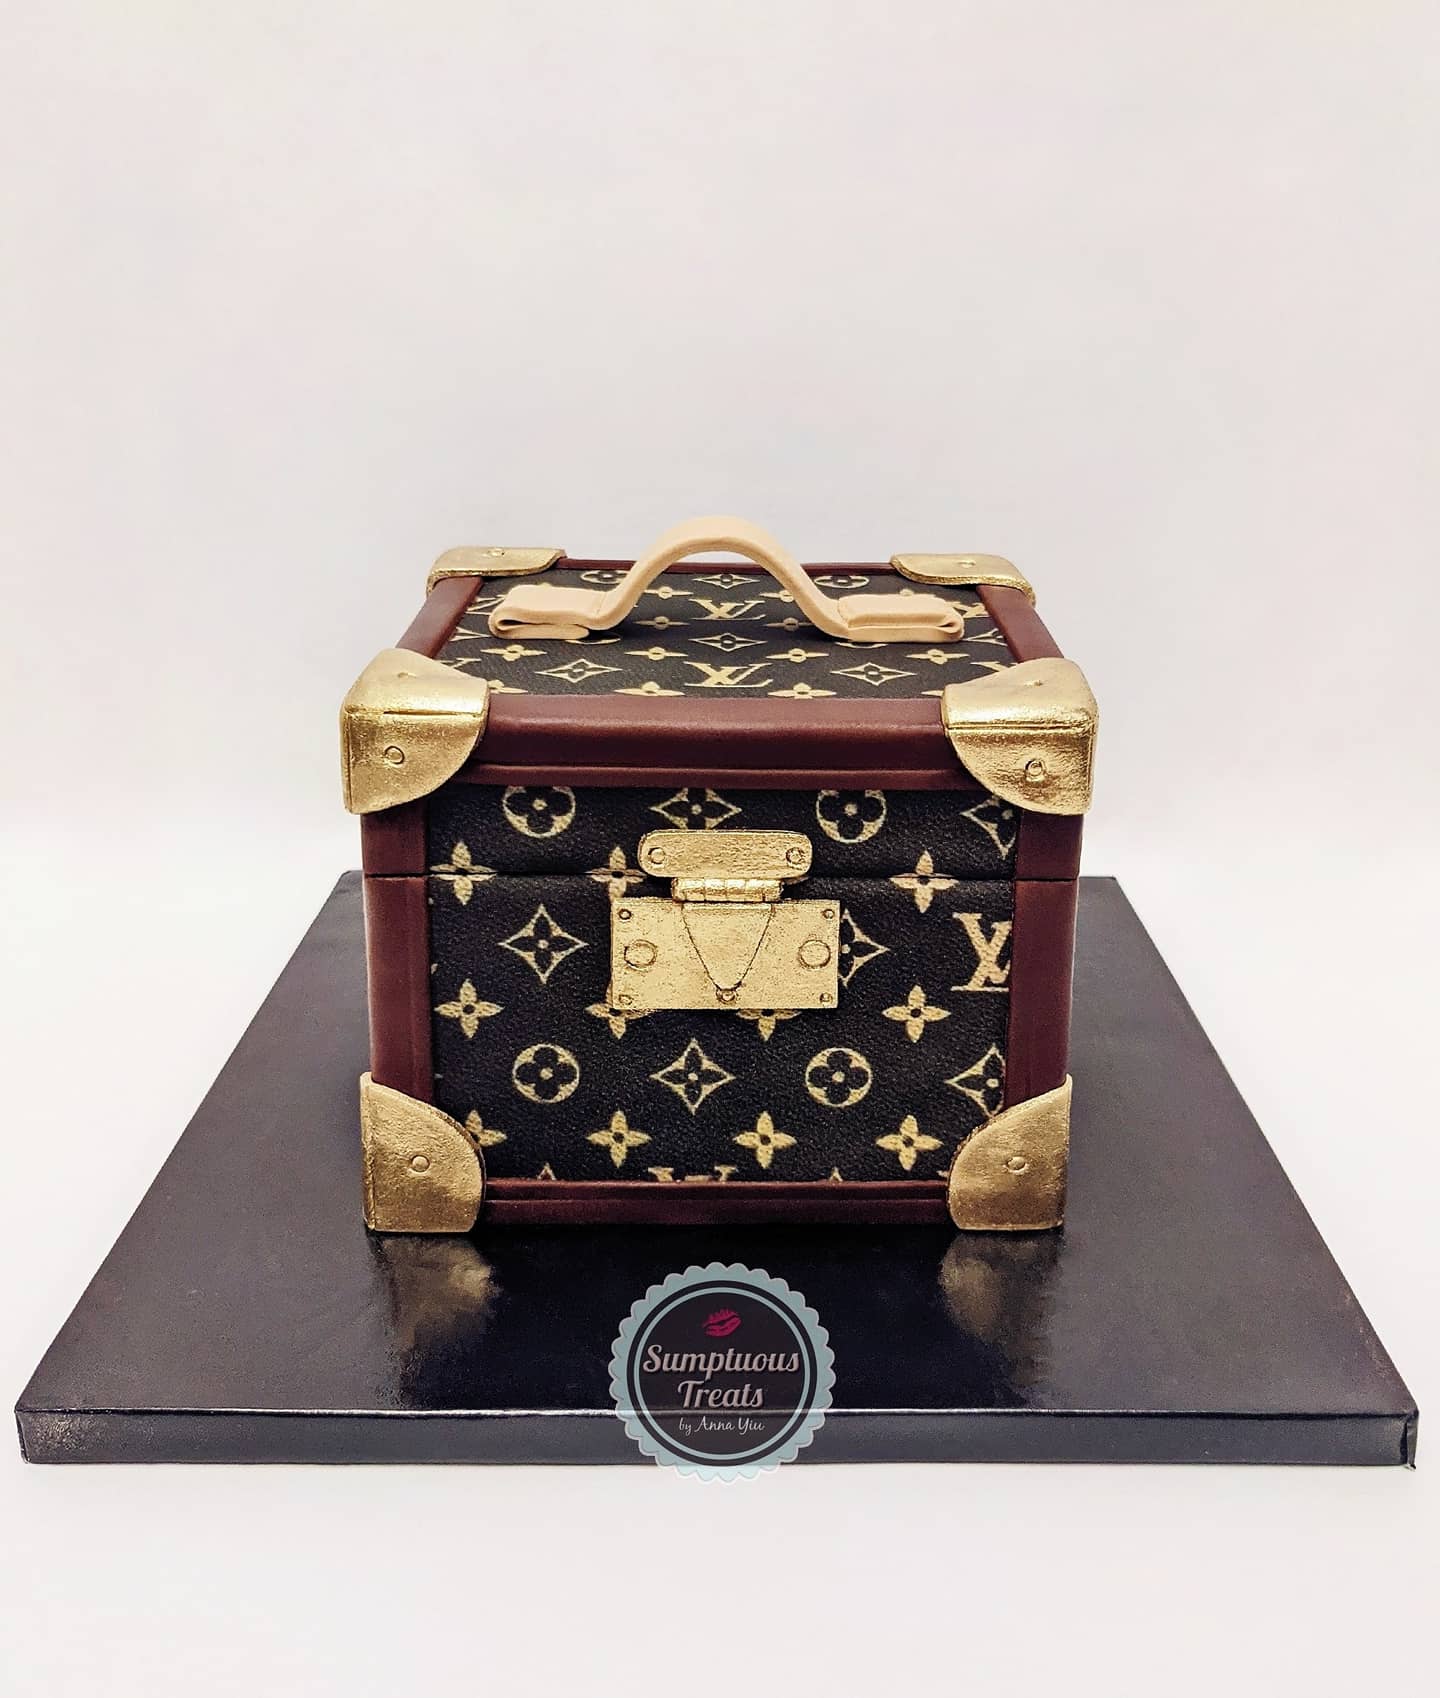 Louis Vuitton Cannes Bag CAKE! 🧡 The real bag Vs the cake version 🍰